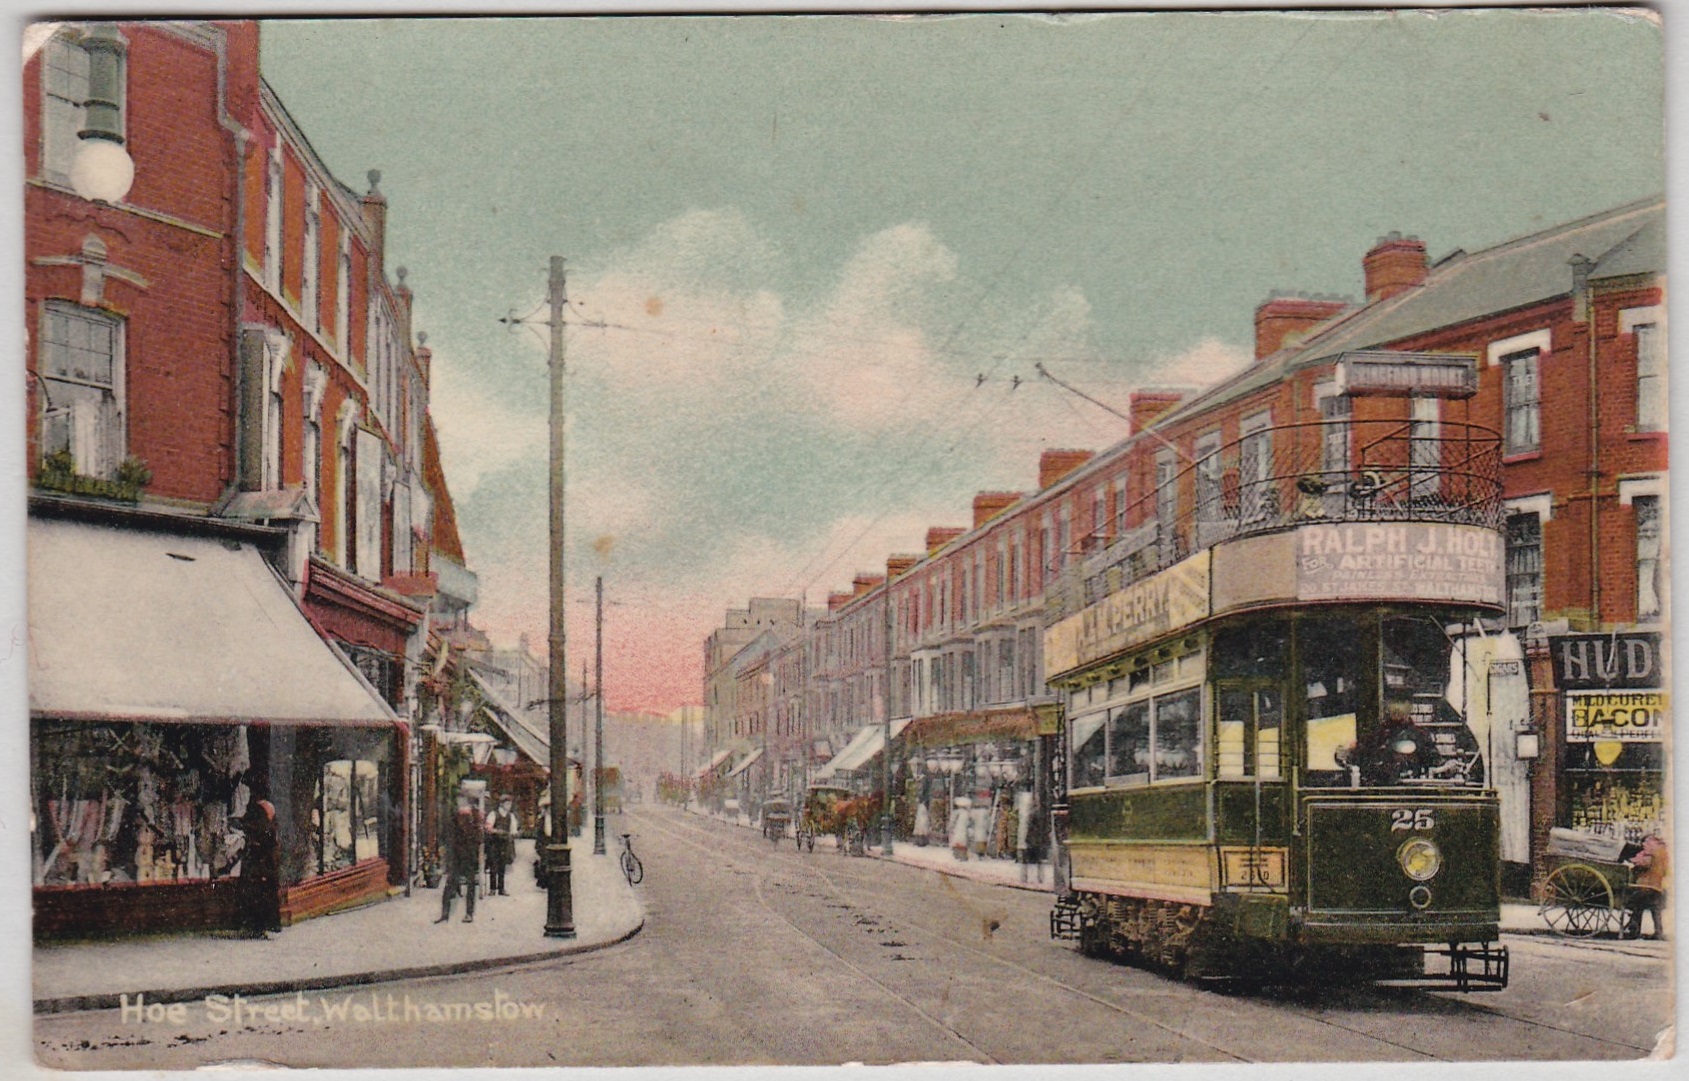 Postcard-Walthamstow (London) Hoe Lane-colour view trams, activity etc used 1918